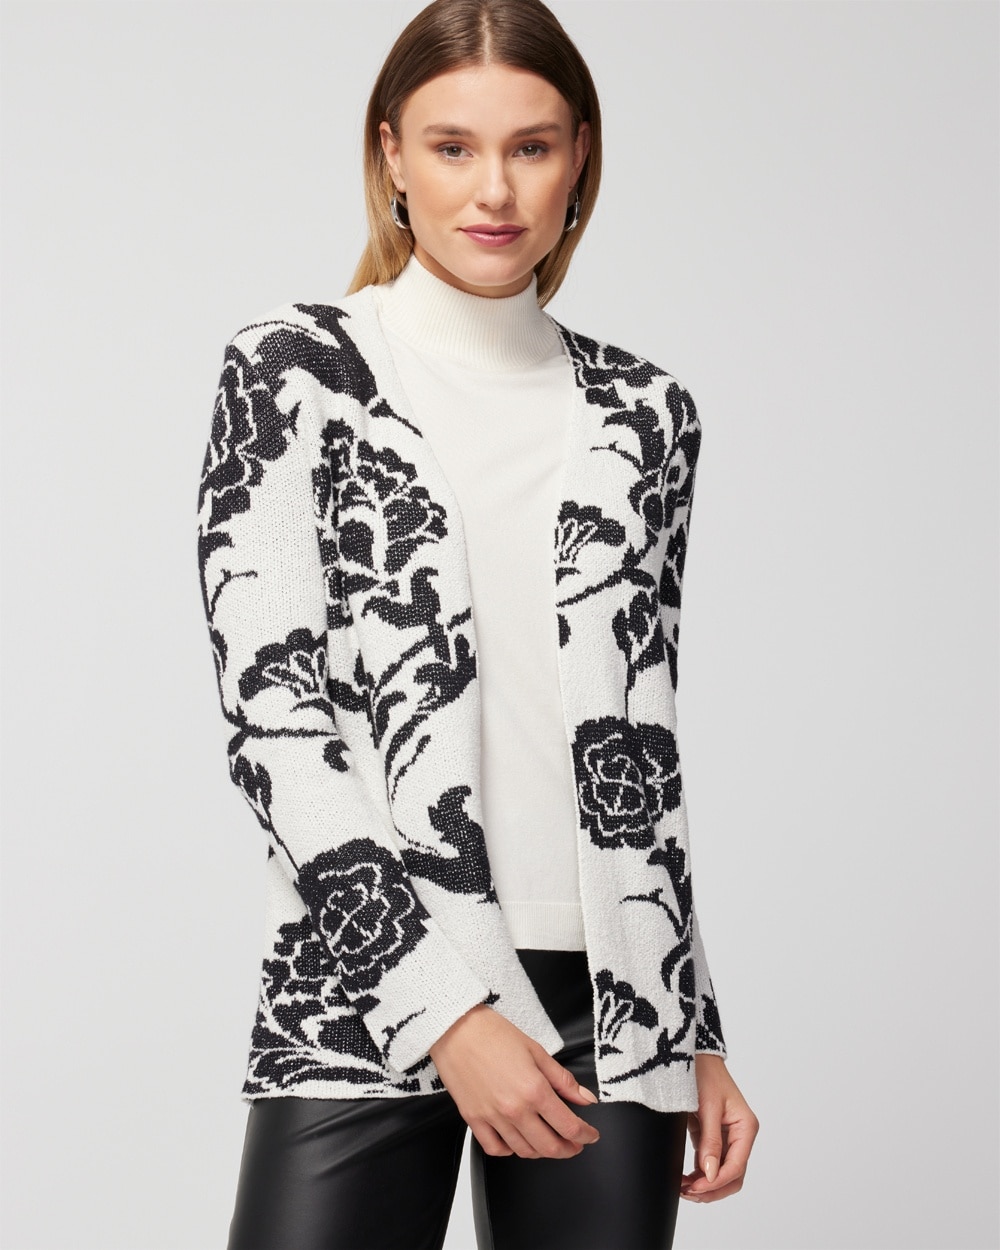 French Rose Florals Cardigan Sweater